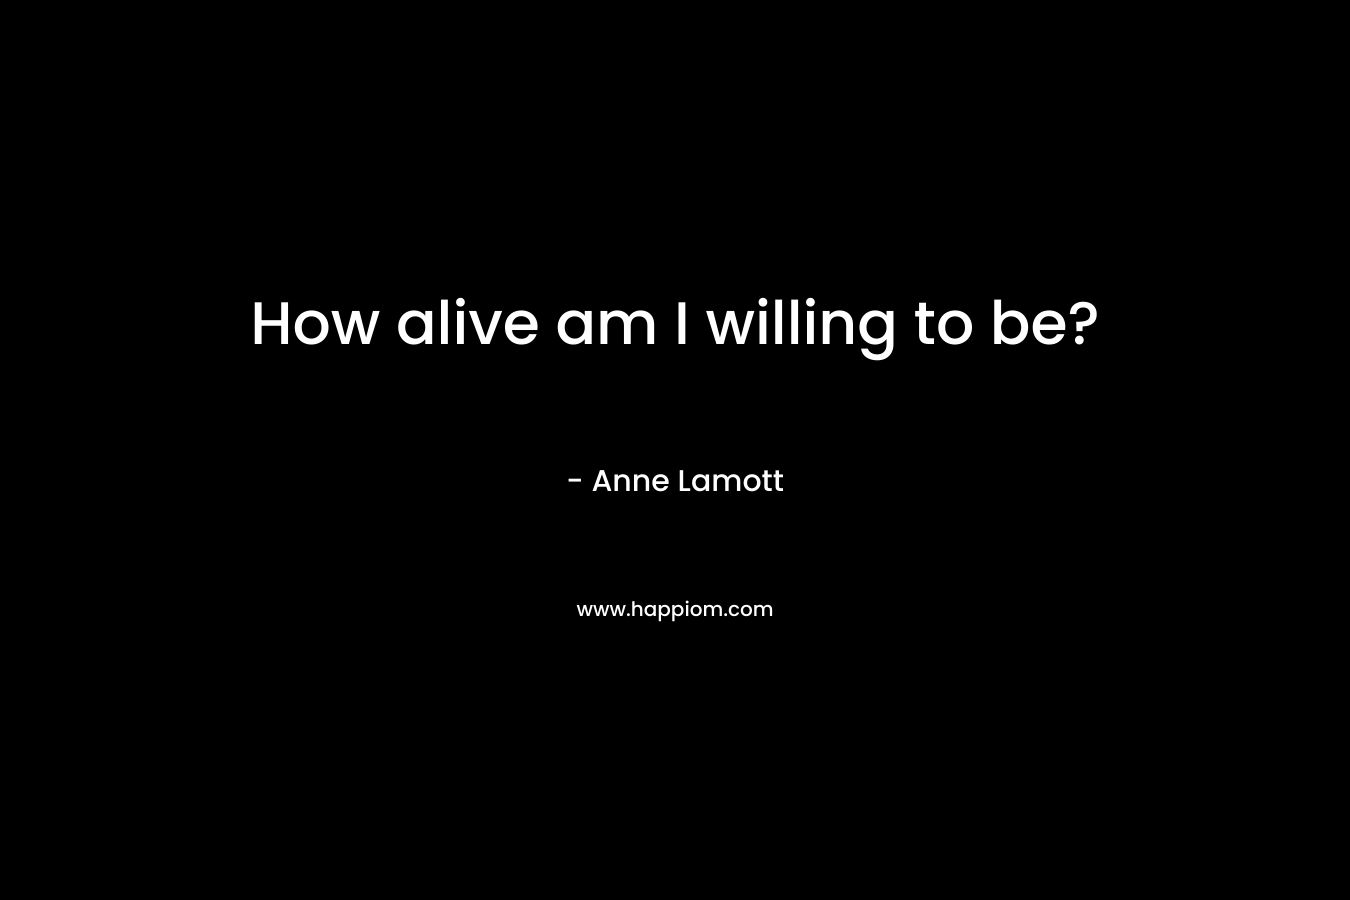 How alive am I willing to be?